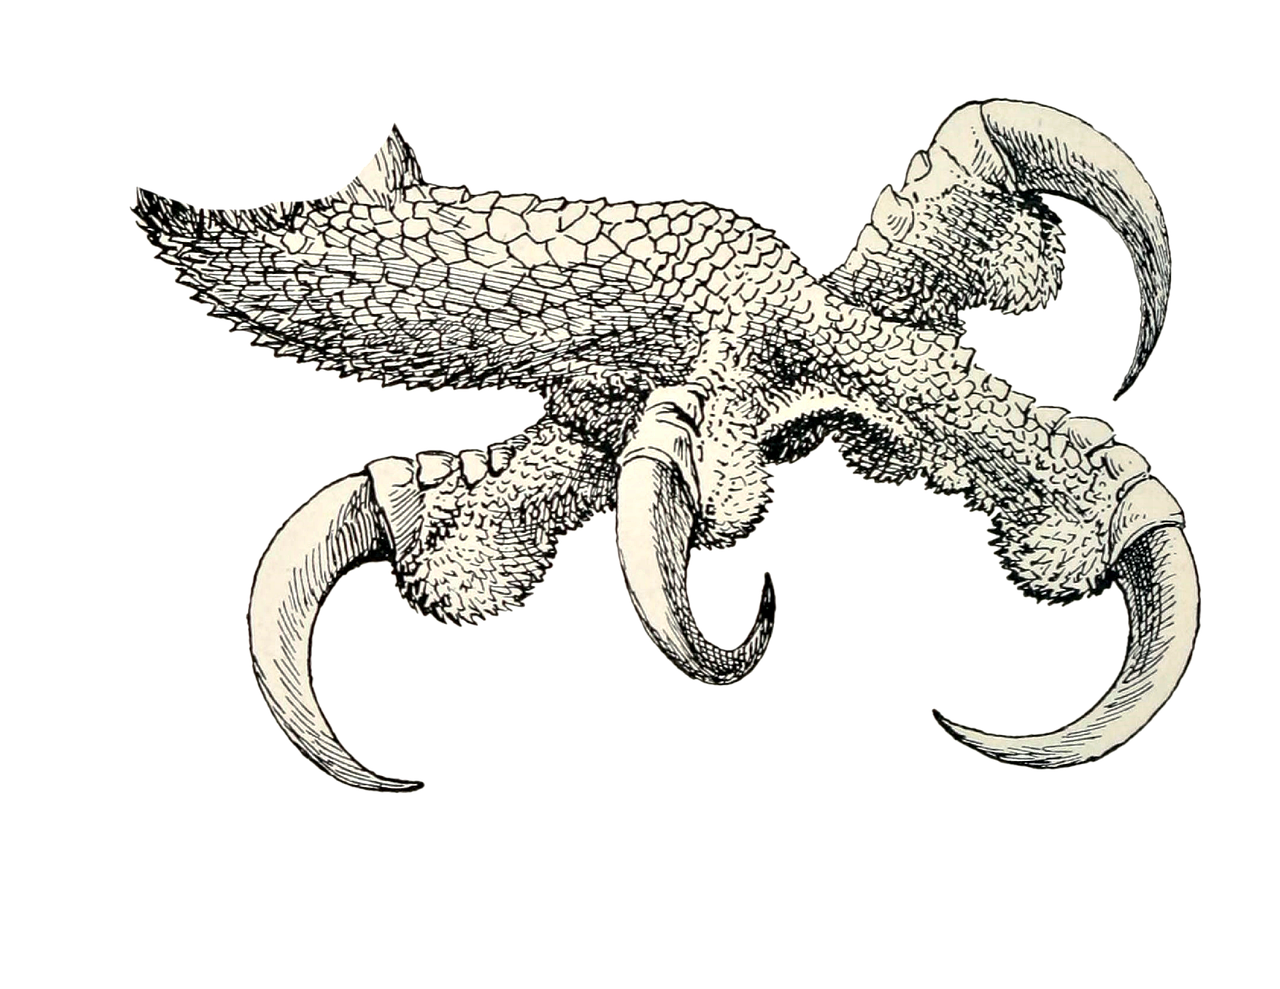 a drawing of a claw on a black background, inspired by Andor Basch, featured on zbrush central, kinetic pointillism, pale white detailed reptile skin, high contrast illustration, highly detailed ink illustration, elephant - crab creature